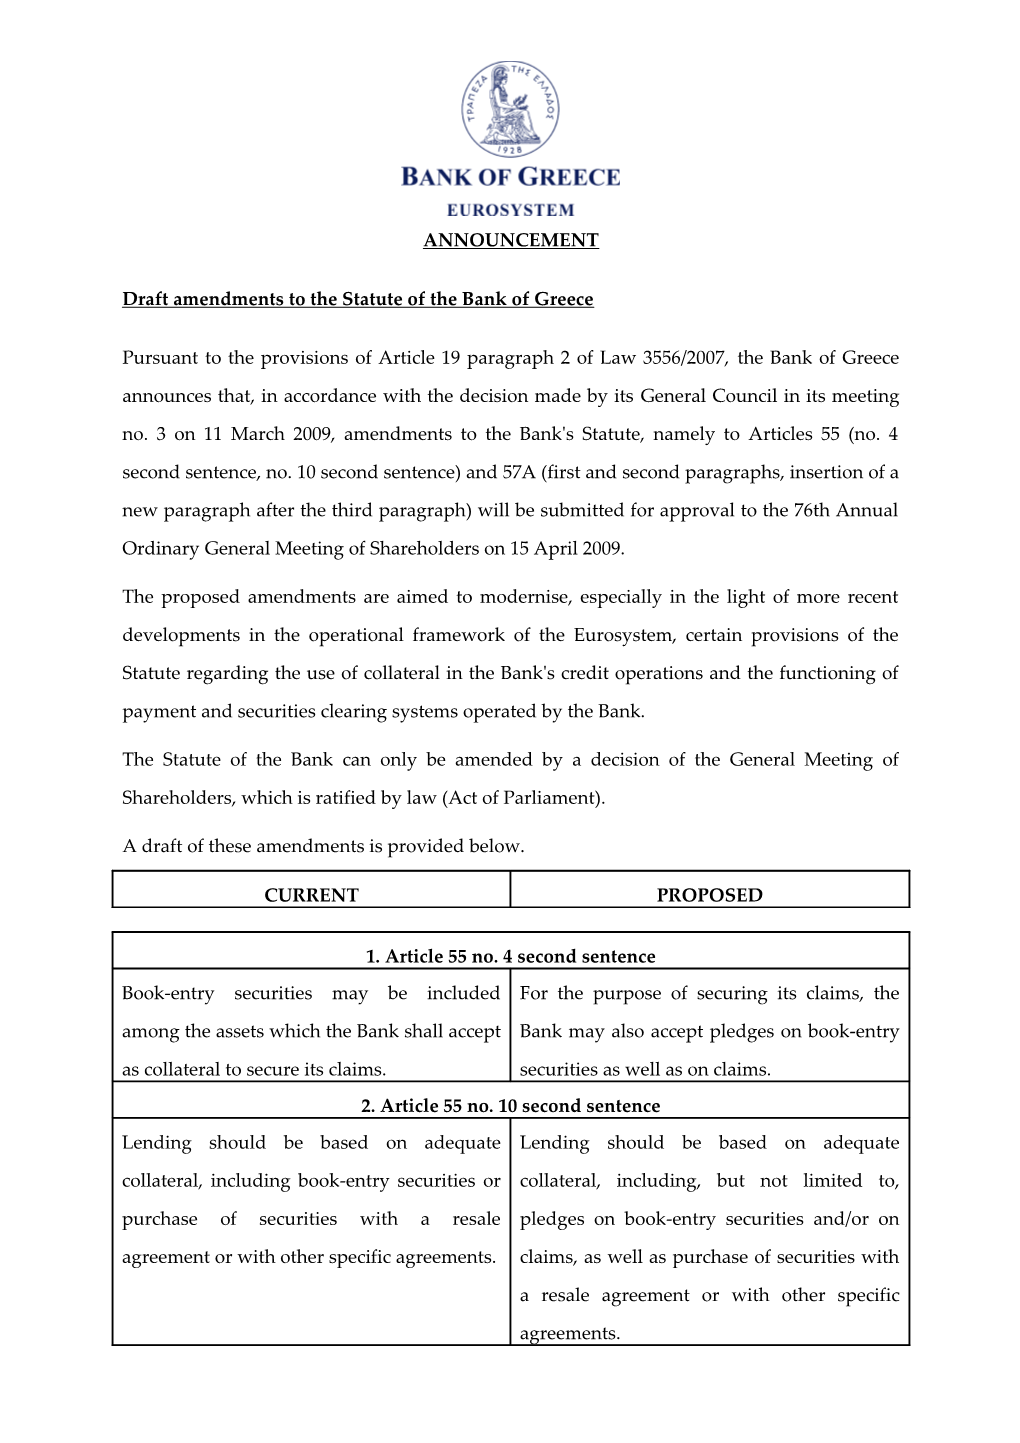 03.04.09 - Draft Amendments to the Statute of the Bank of Greecel